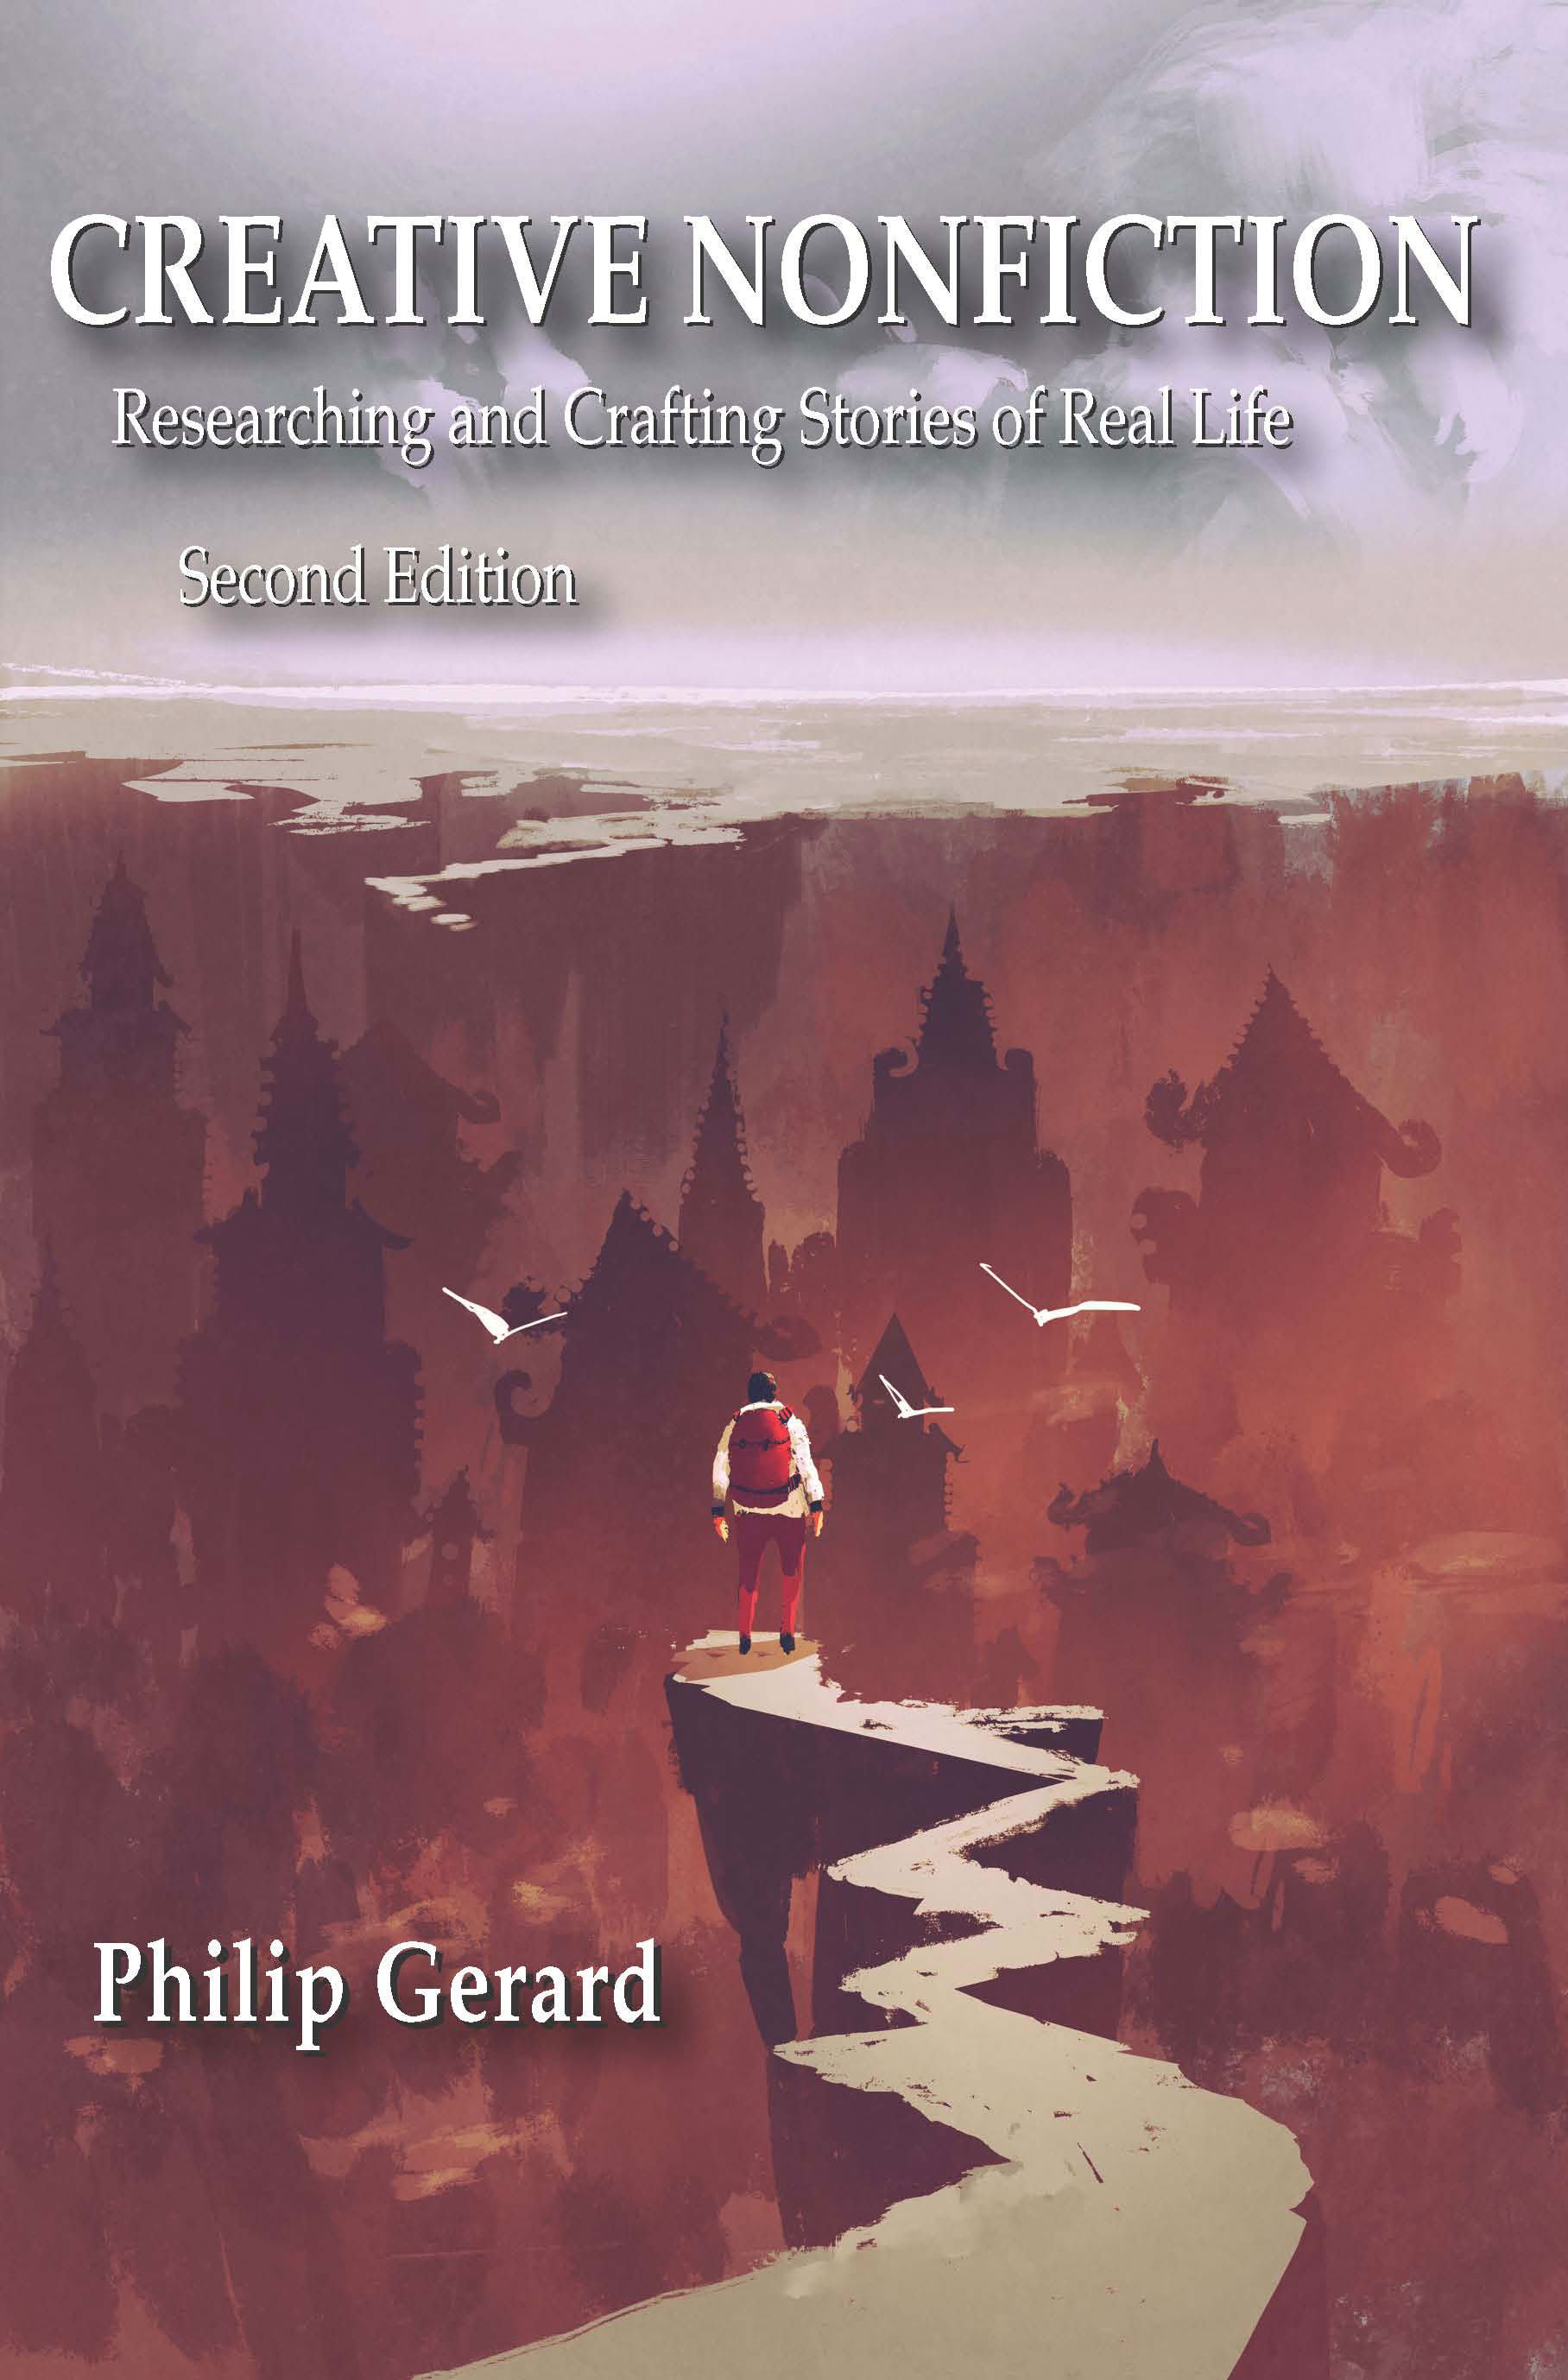 Creative Nonfiction: Researching and Crafting Stories of Real Life   , Second Edition by Philip  Gerard